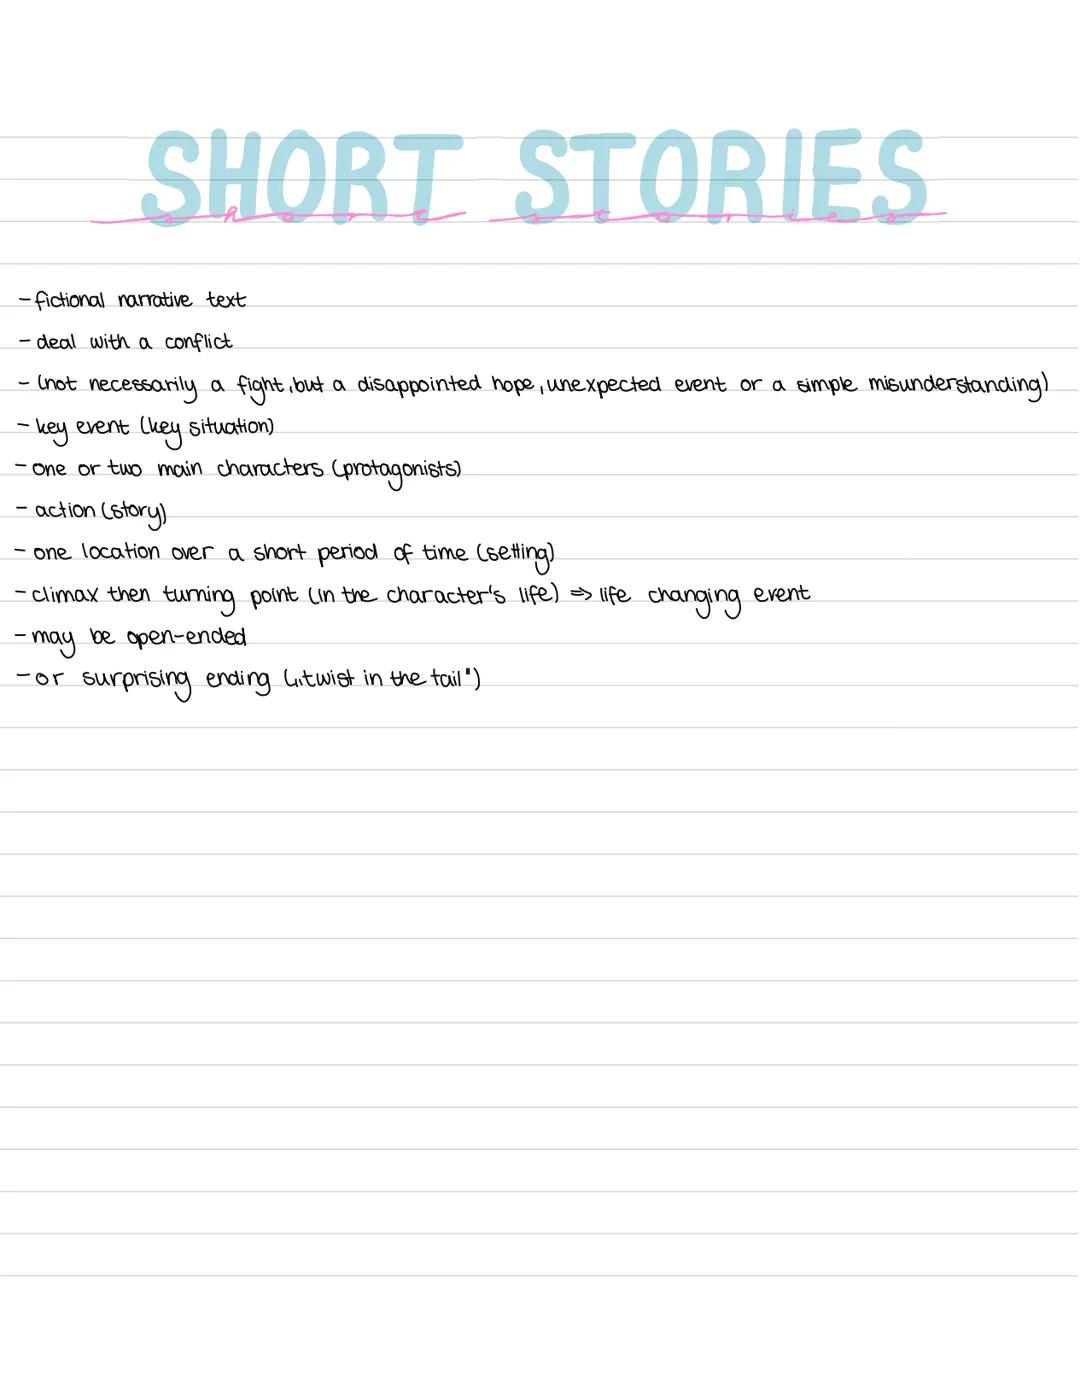 SHORT STORIES
-fictional narrative text
- deal with a conflict.
- (not necessarily a fight, but a disappointed hope, unexpected event or a s